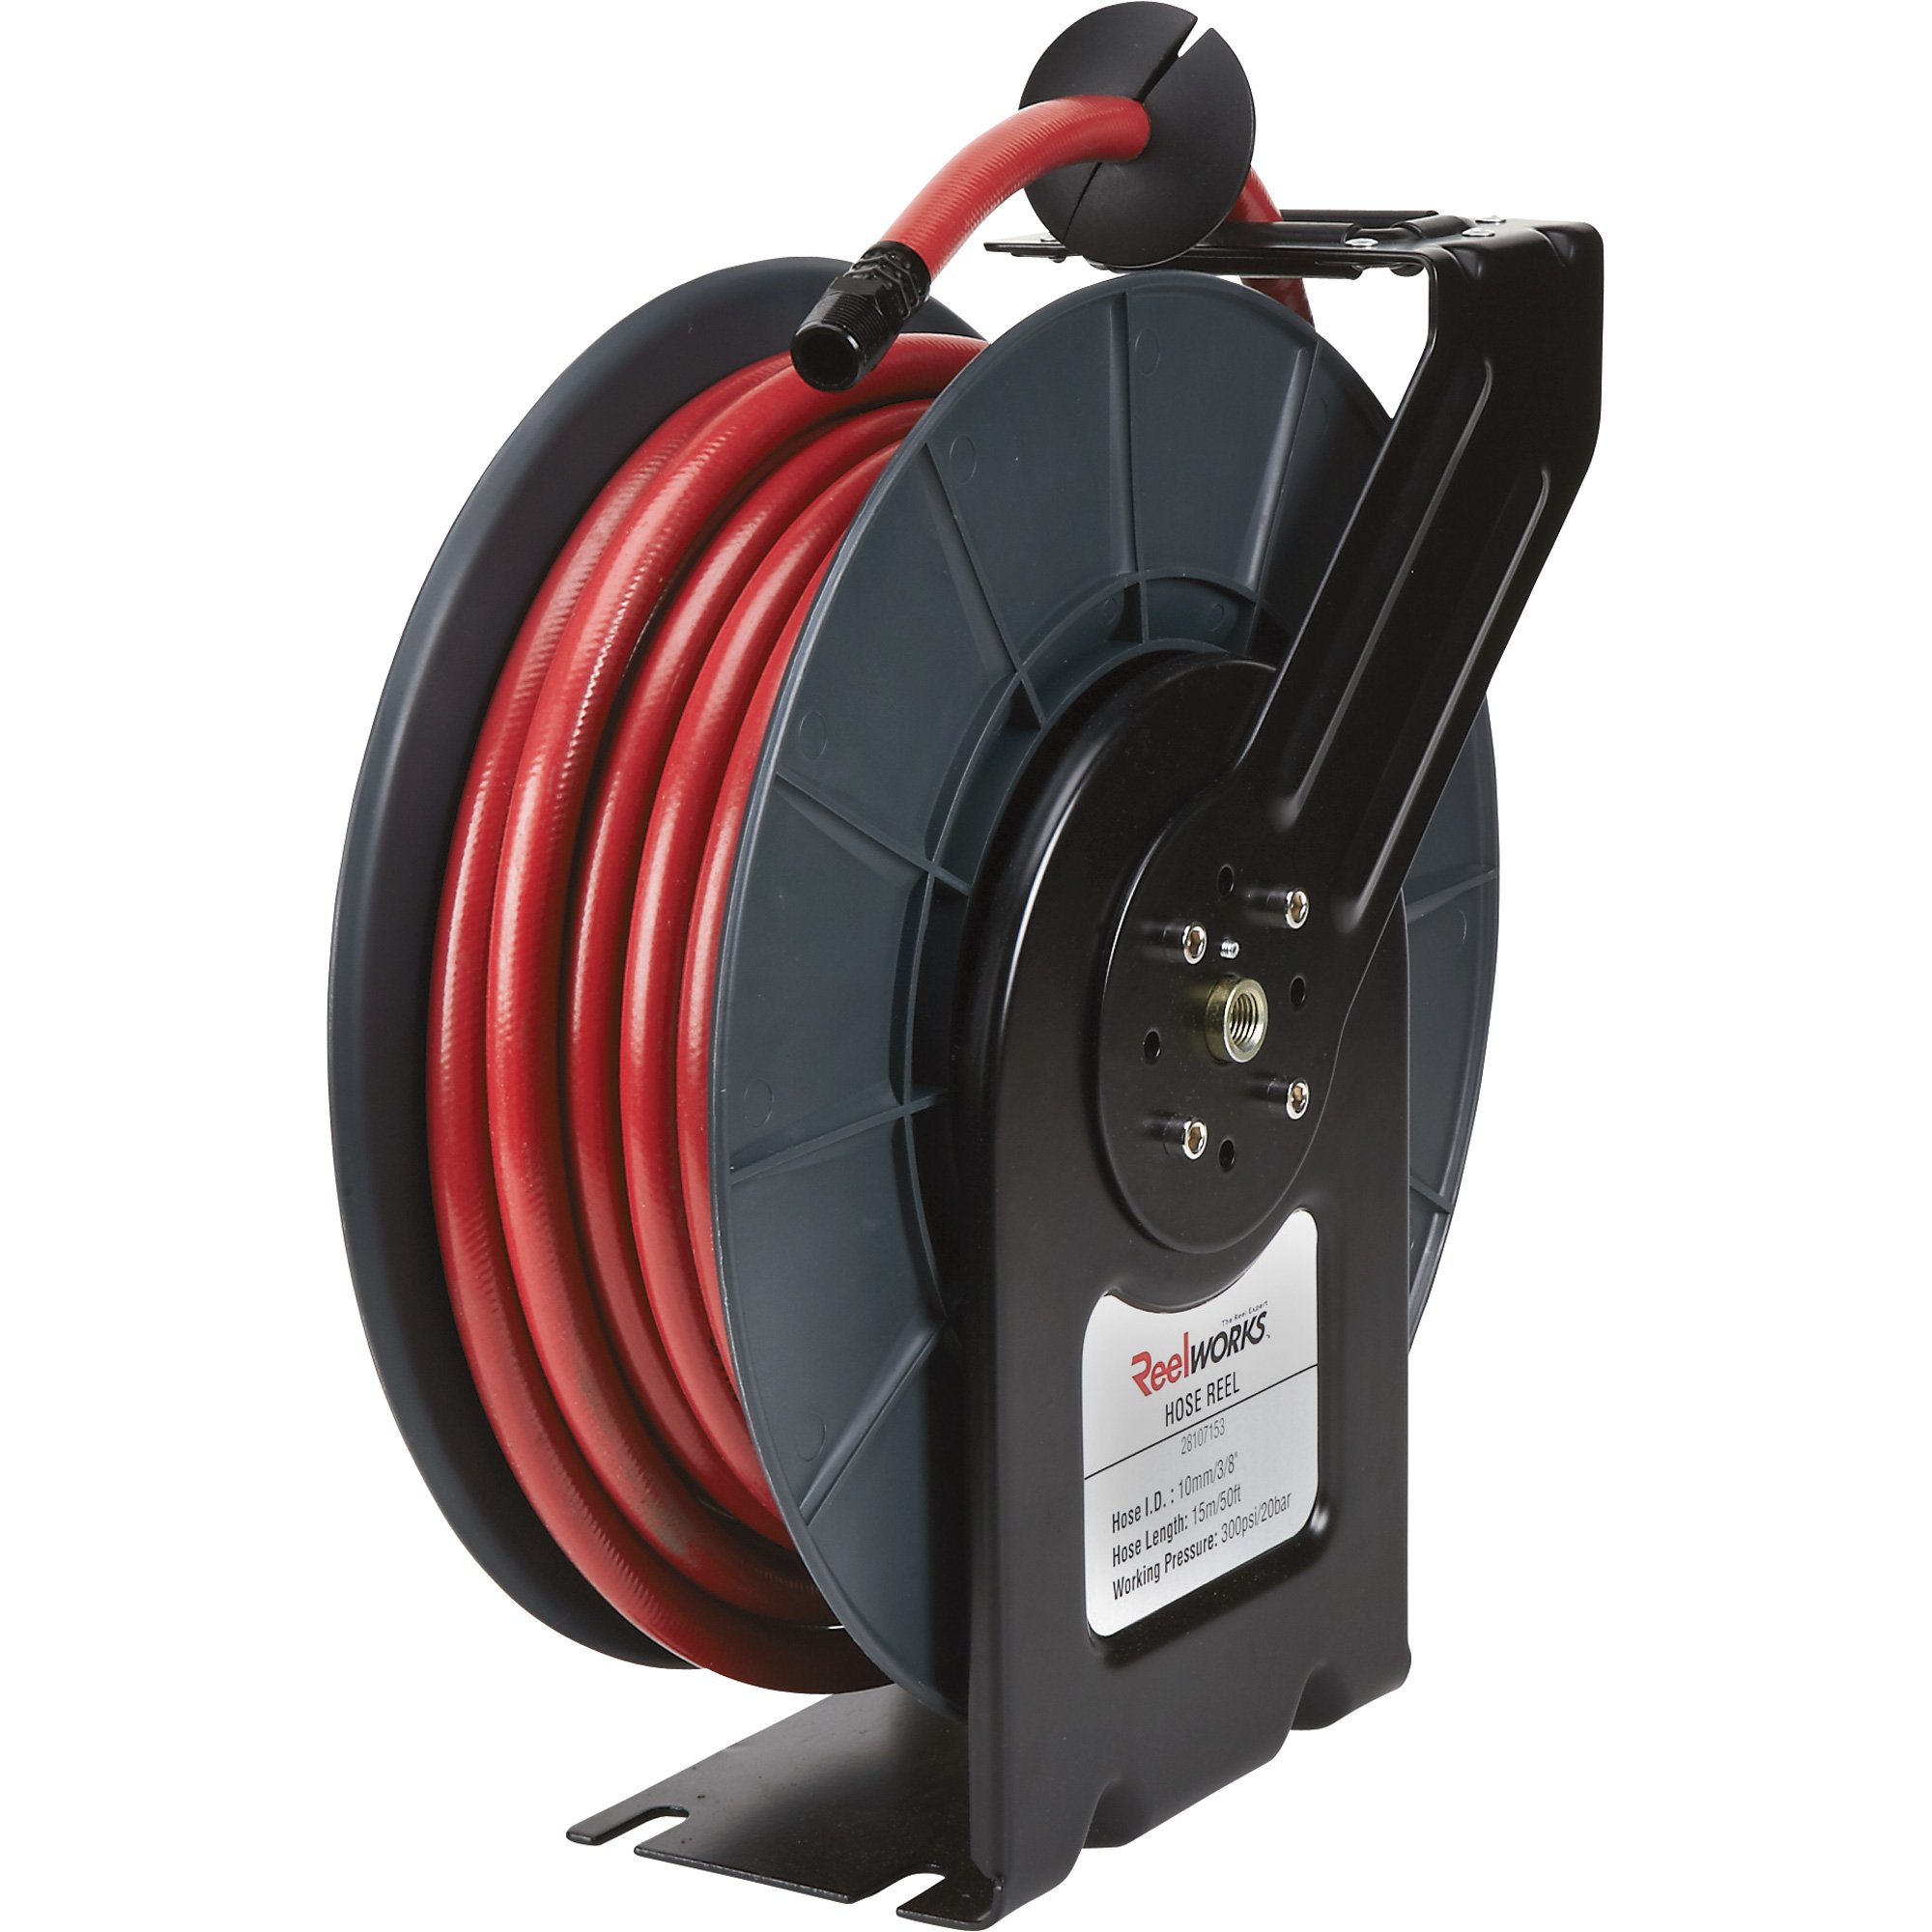 ReelWorks Lightweight Spring-Driven Hose Reel — With 3/8in. x 50ft. Hybrid  Polymer Hose, Max. 300 PSI